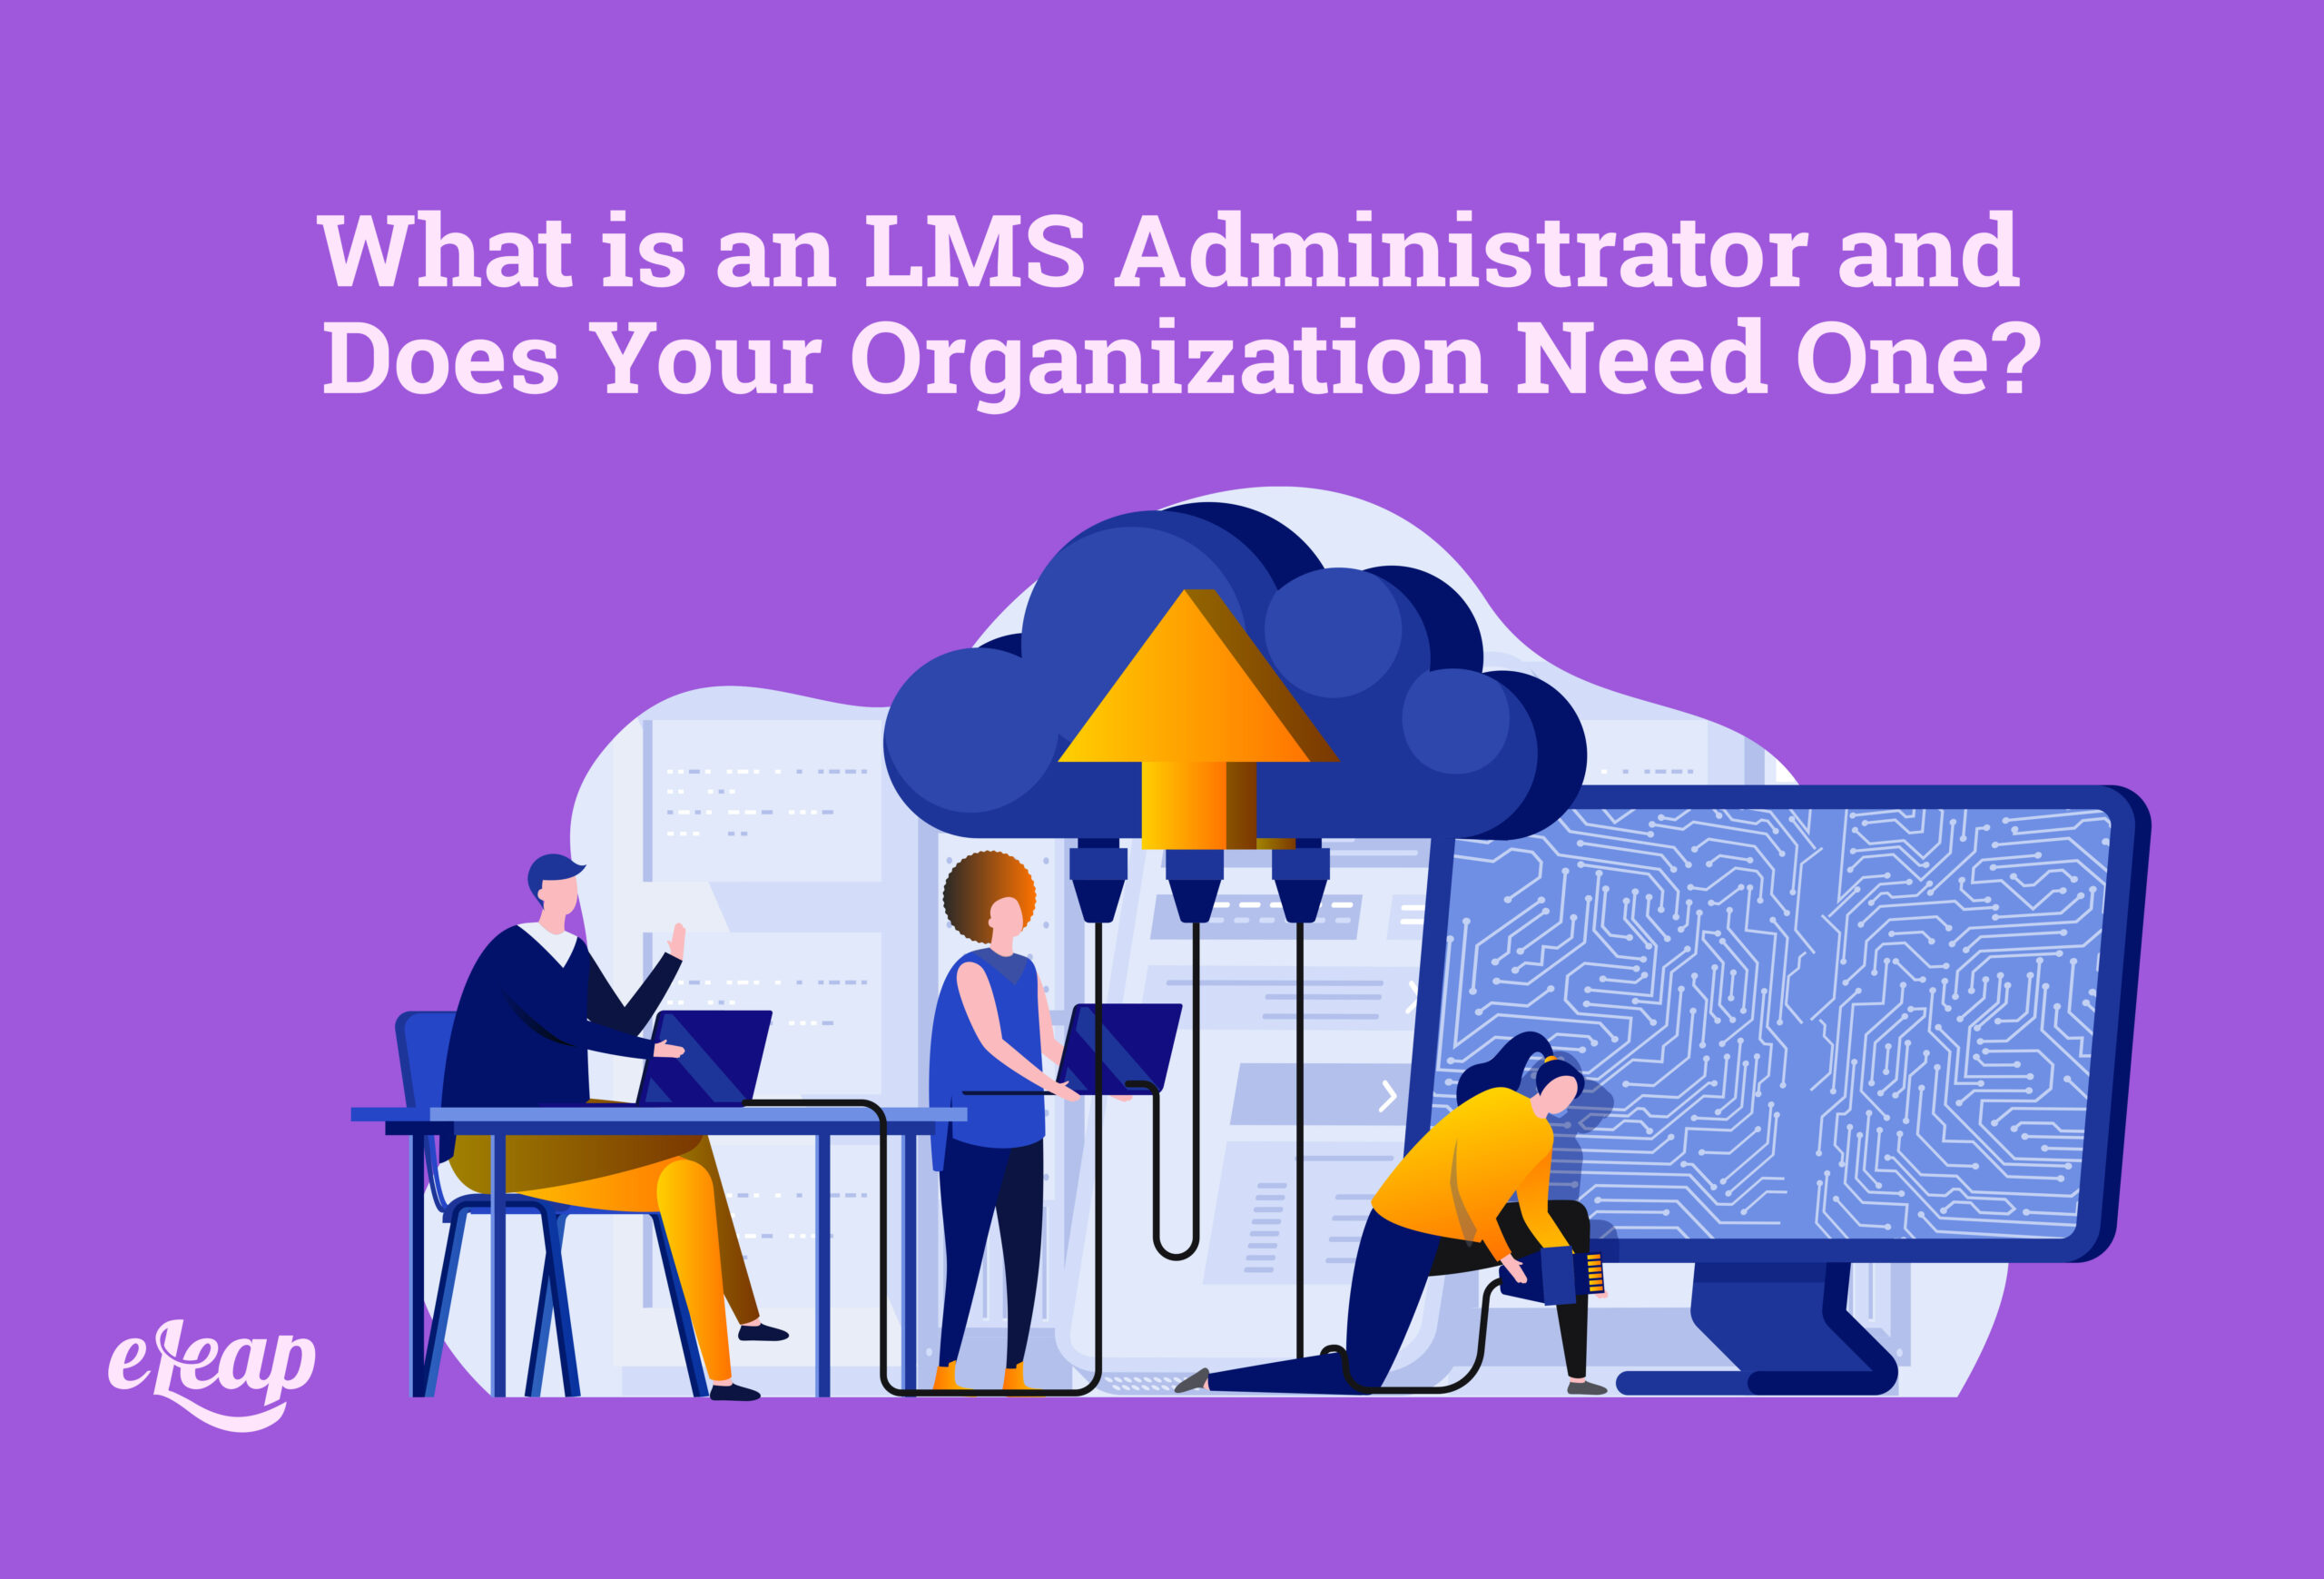 What is an LMS Administrator and Does Your Organization Need One?